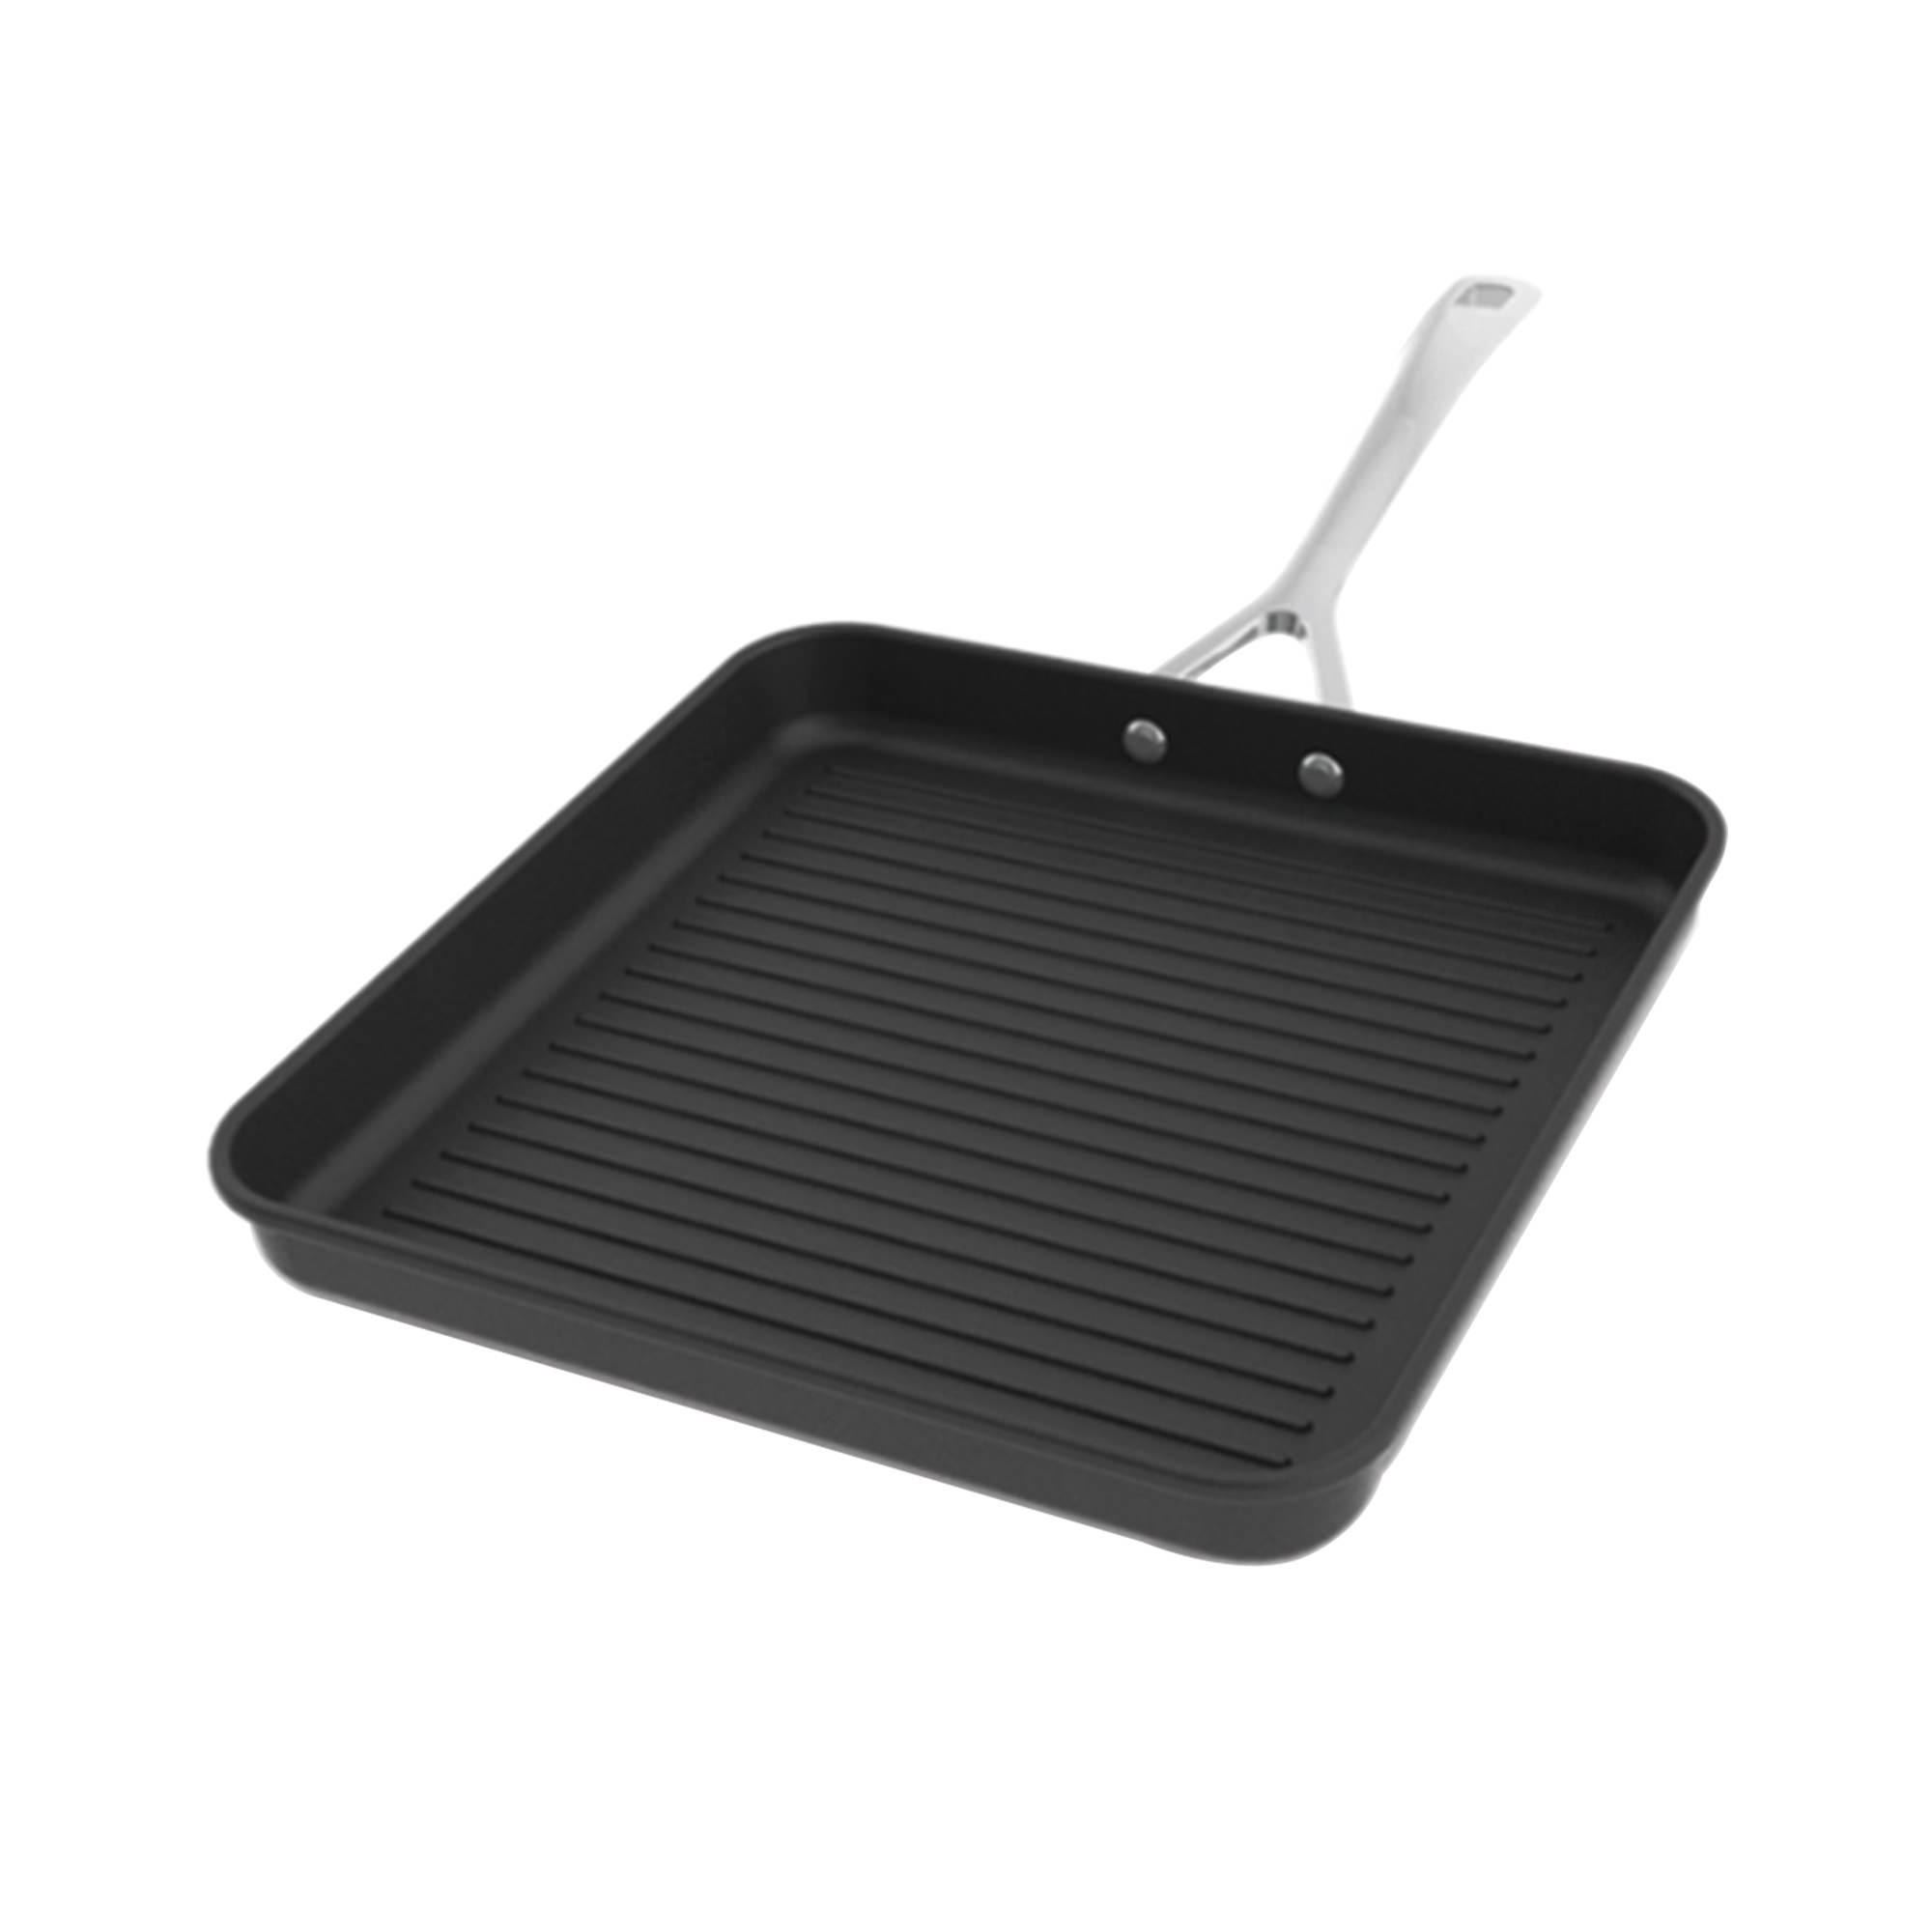 Le Creuset Toughened Non Stick Square Grill Pan with Helper Handle 28cm Image 1